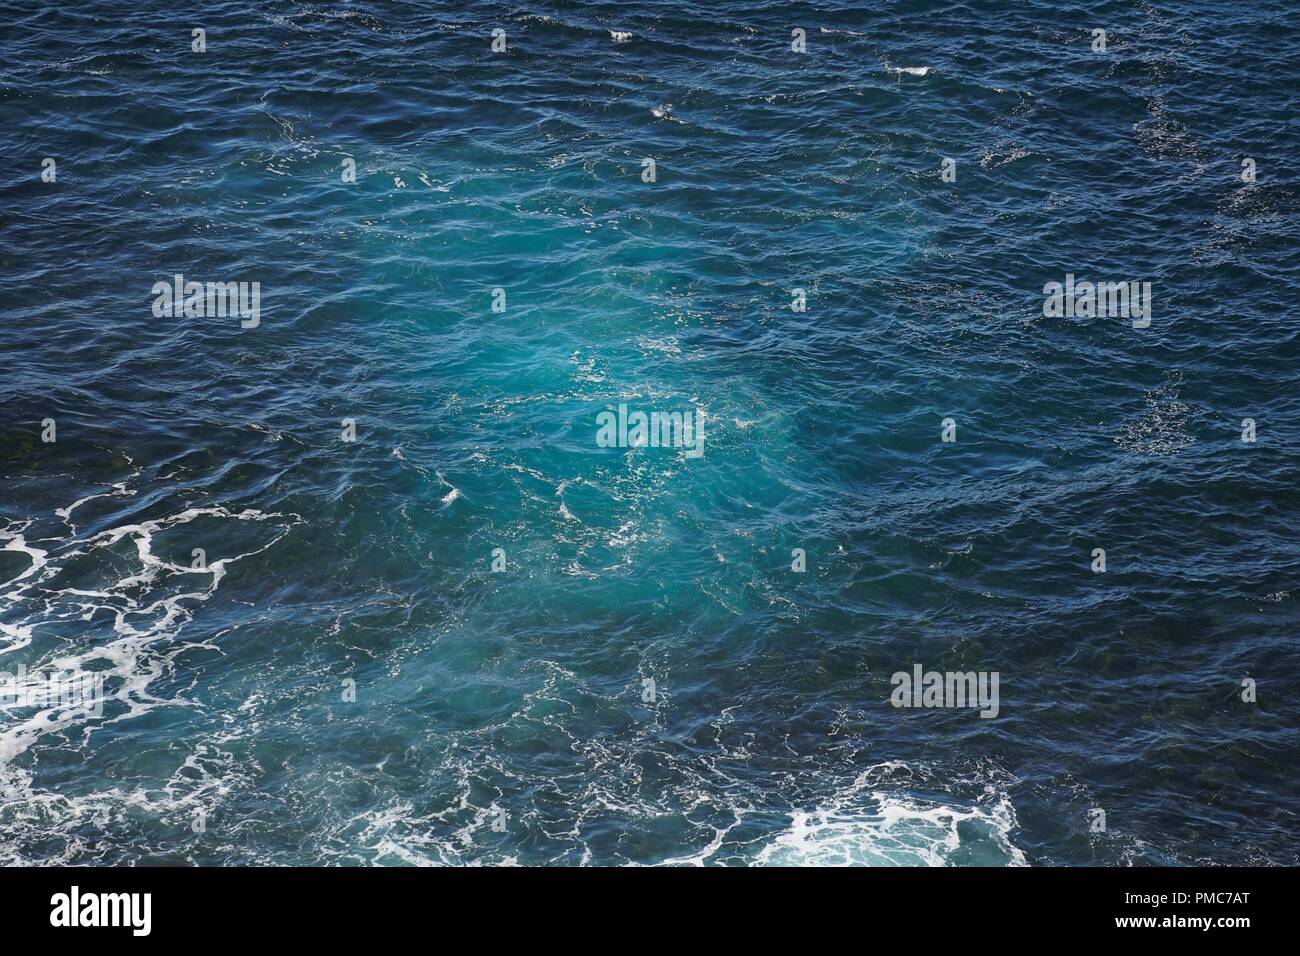 Sea water and seafoam, viewed from above and closeup. Stock Photo